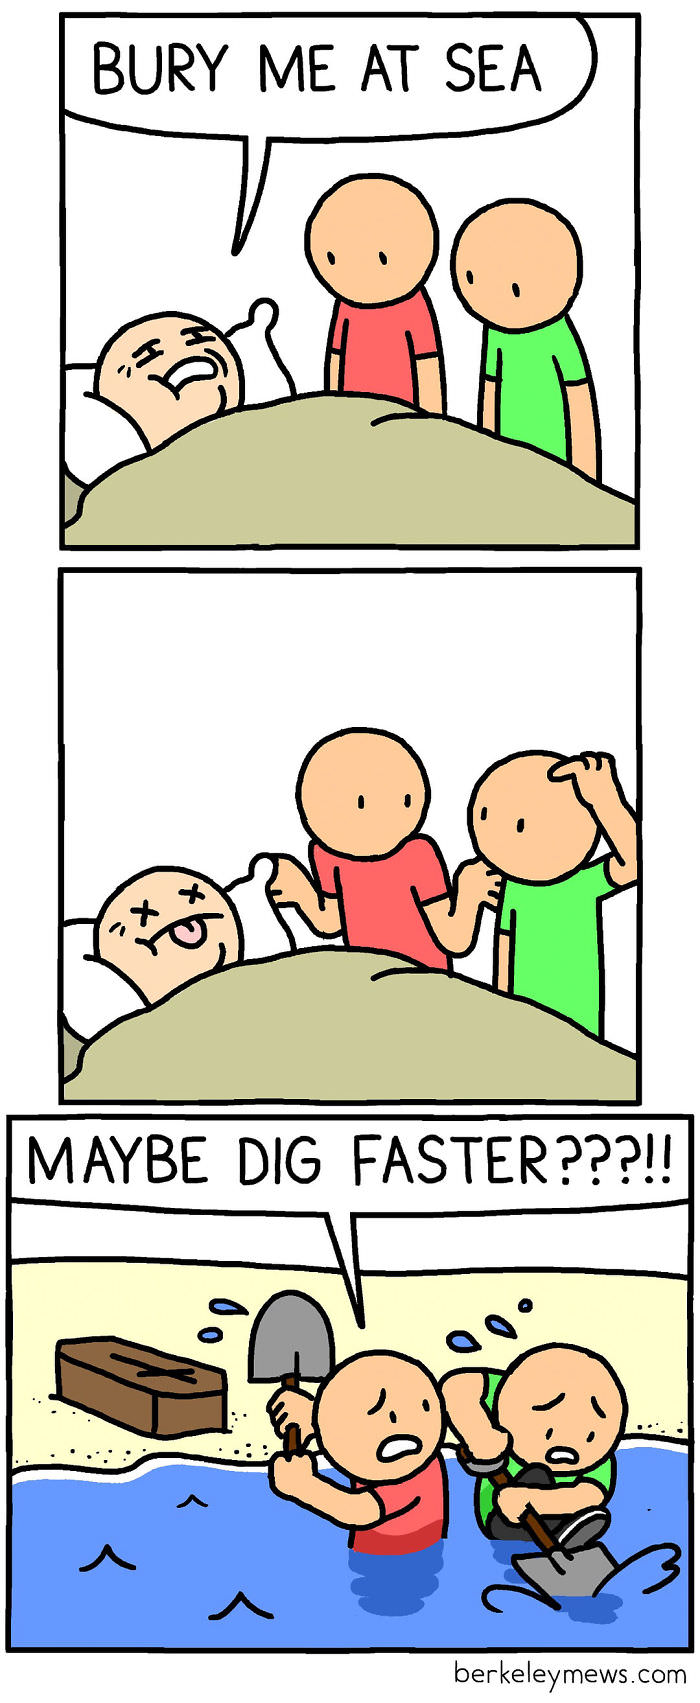 These Comics Start Innocently Enough But Wait Till You See the Dark Humor Unfold